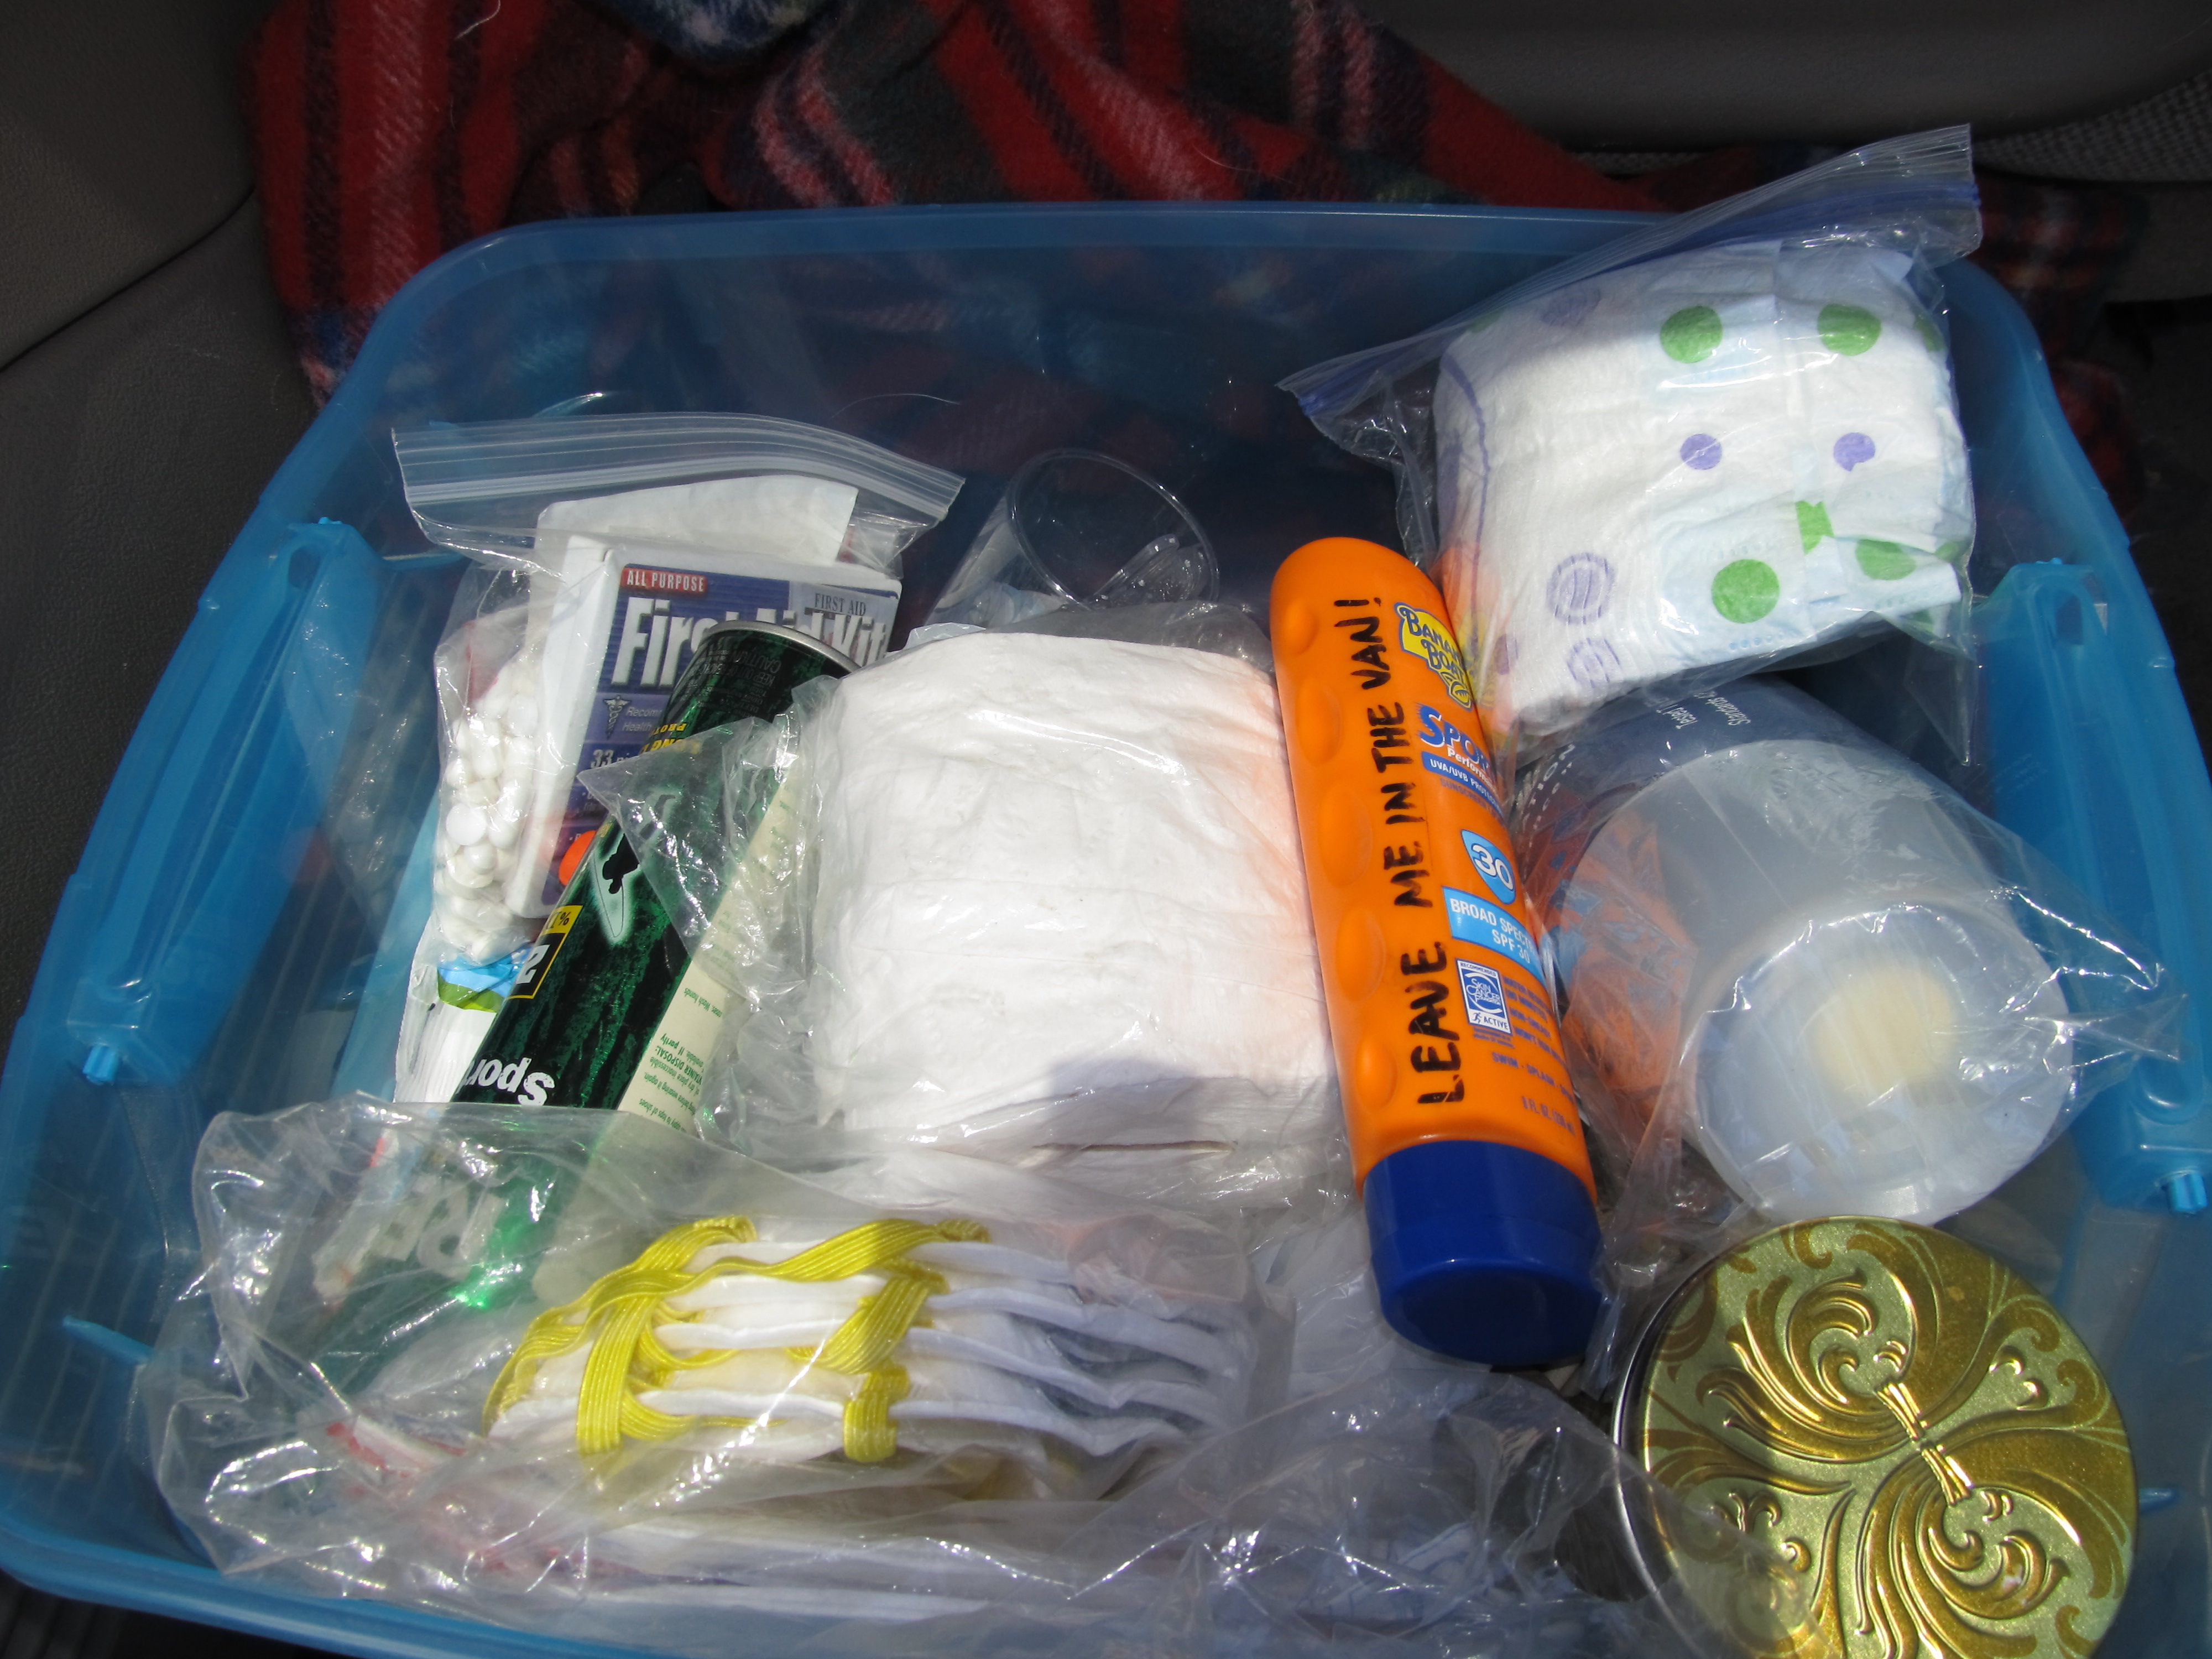 Seven Times I Was Glad to Have an Emergency Kit Just Last Week